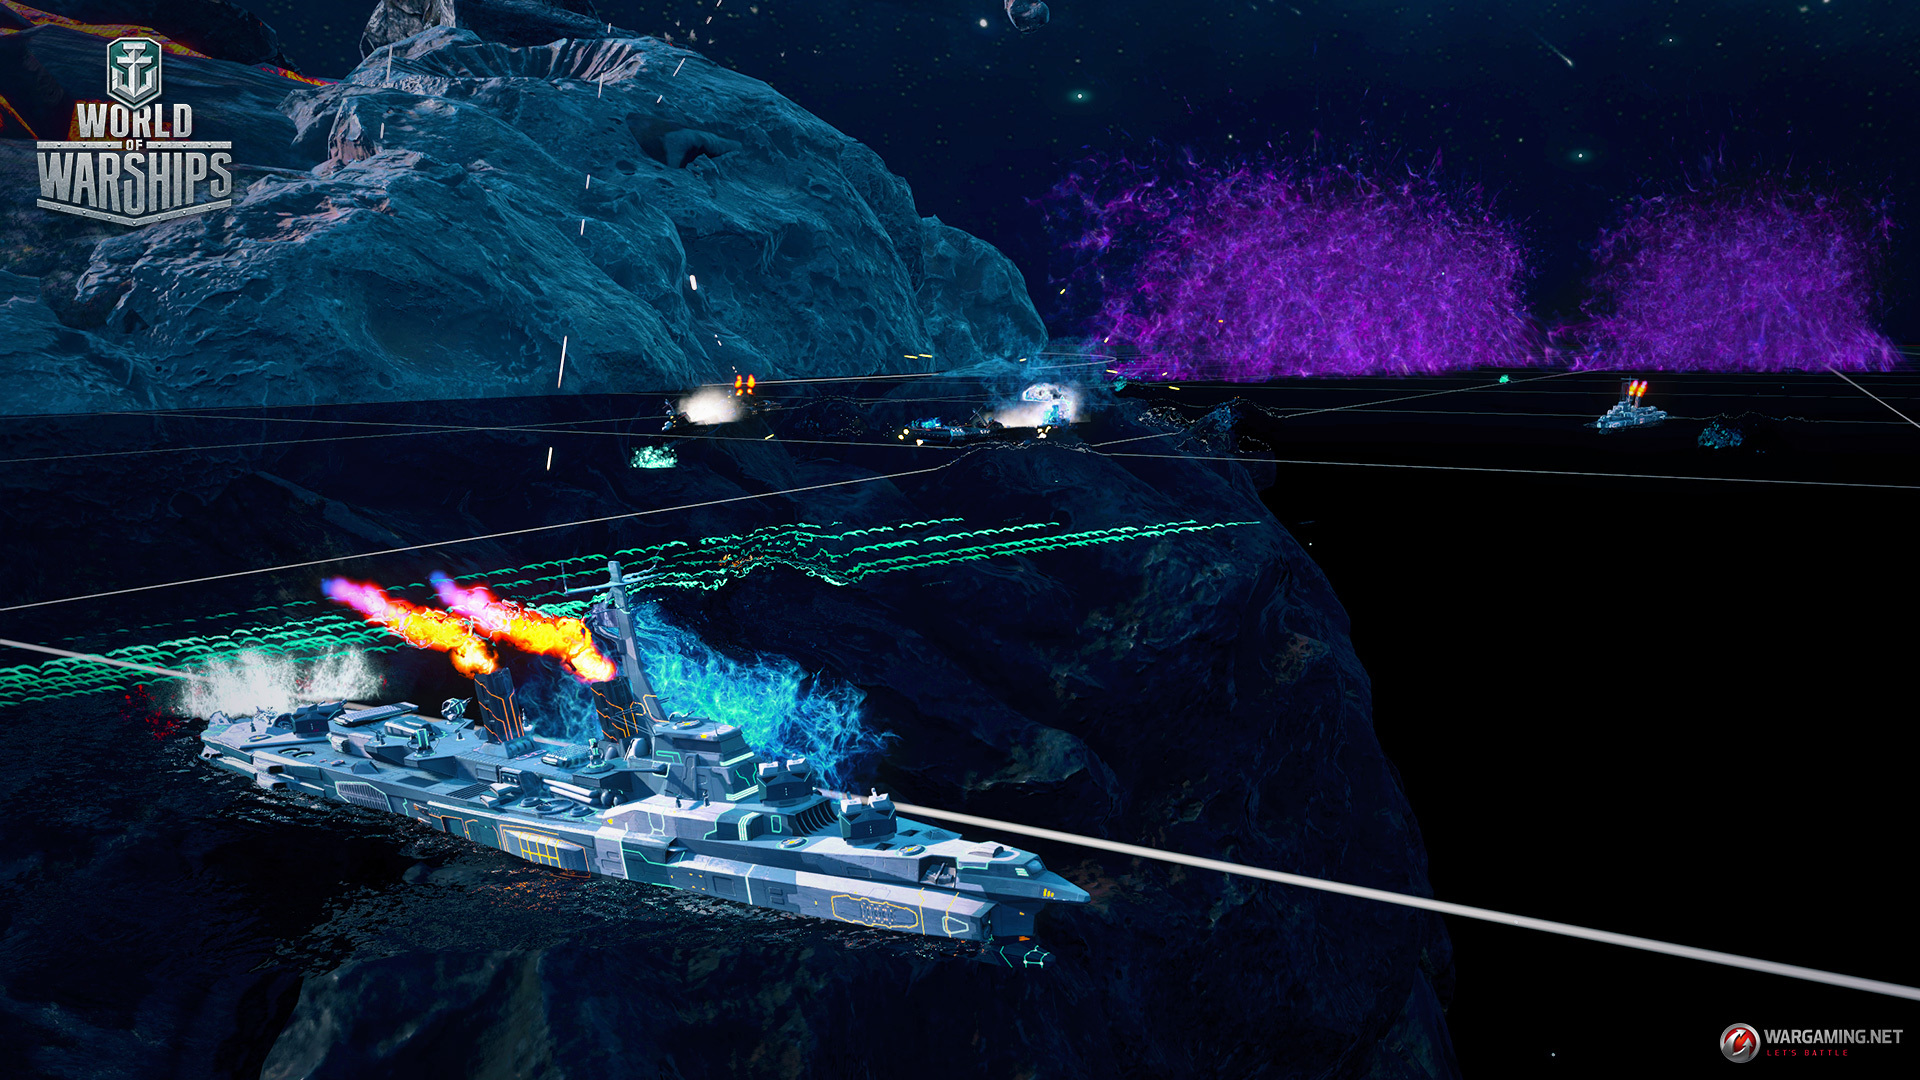 Space ships are heading to World of Warships this week